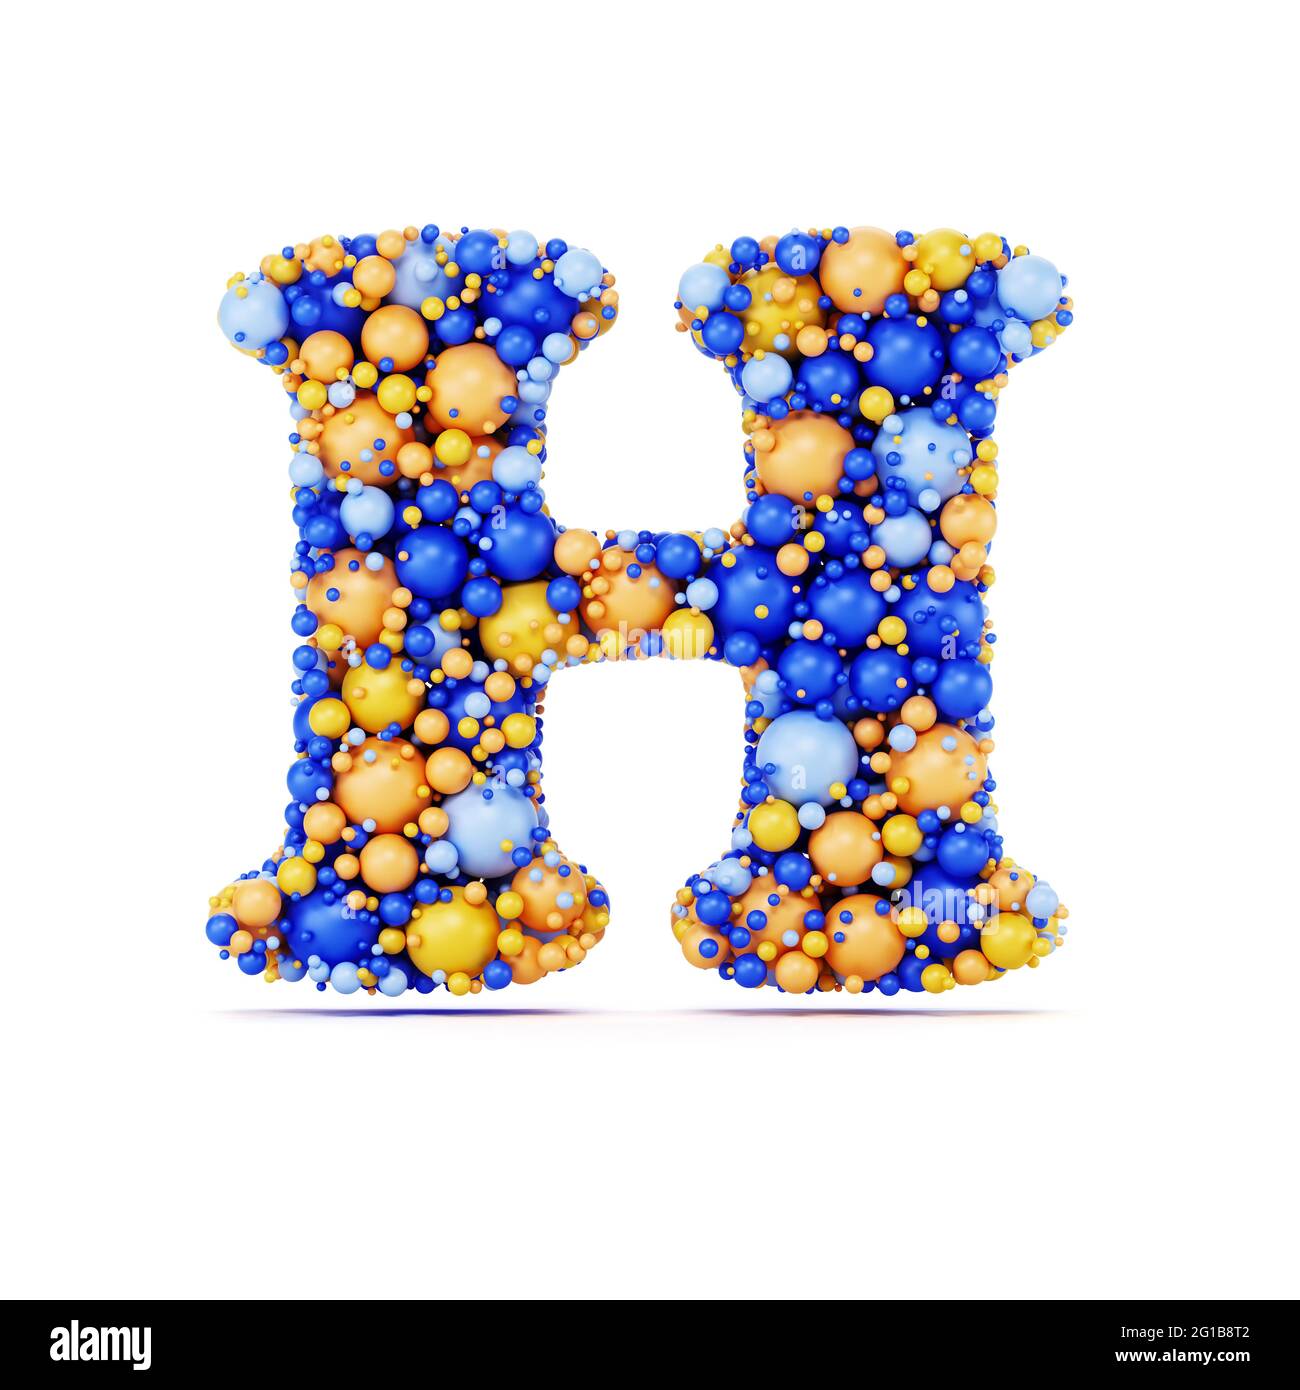 H letter with colored shiny balls. Realistic 3d rendering illustration. Isolated on white background with shadow cast Stock Photo